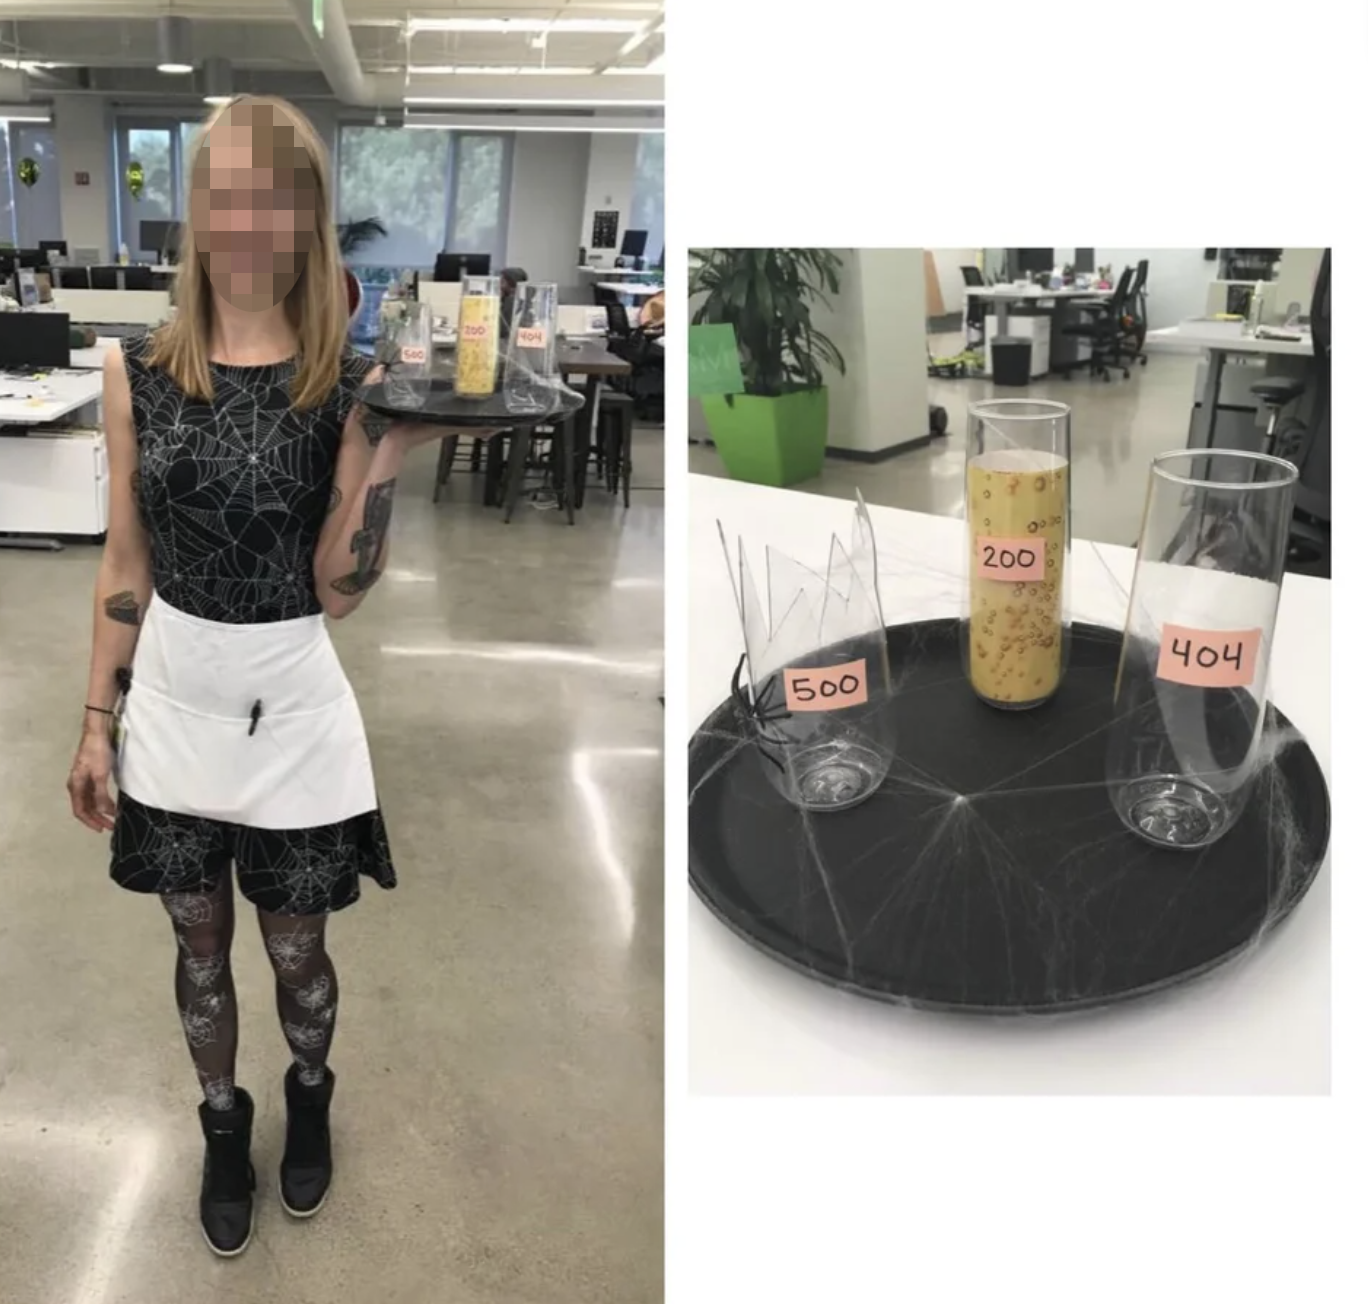 A woman dressed as a waitress in a spiderweb themed outfit with classes saying &quot;404&quot; &quot;500&quot; and &quot;200&quot; errors